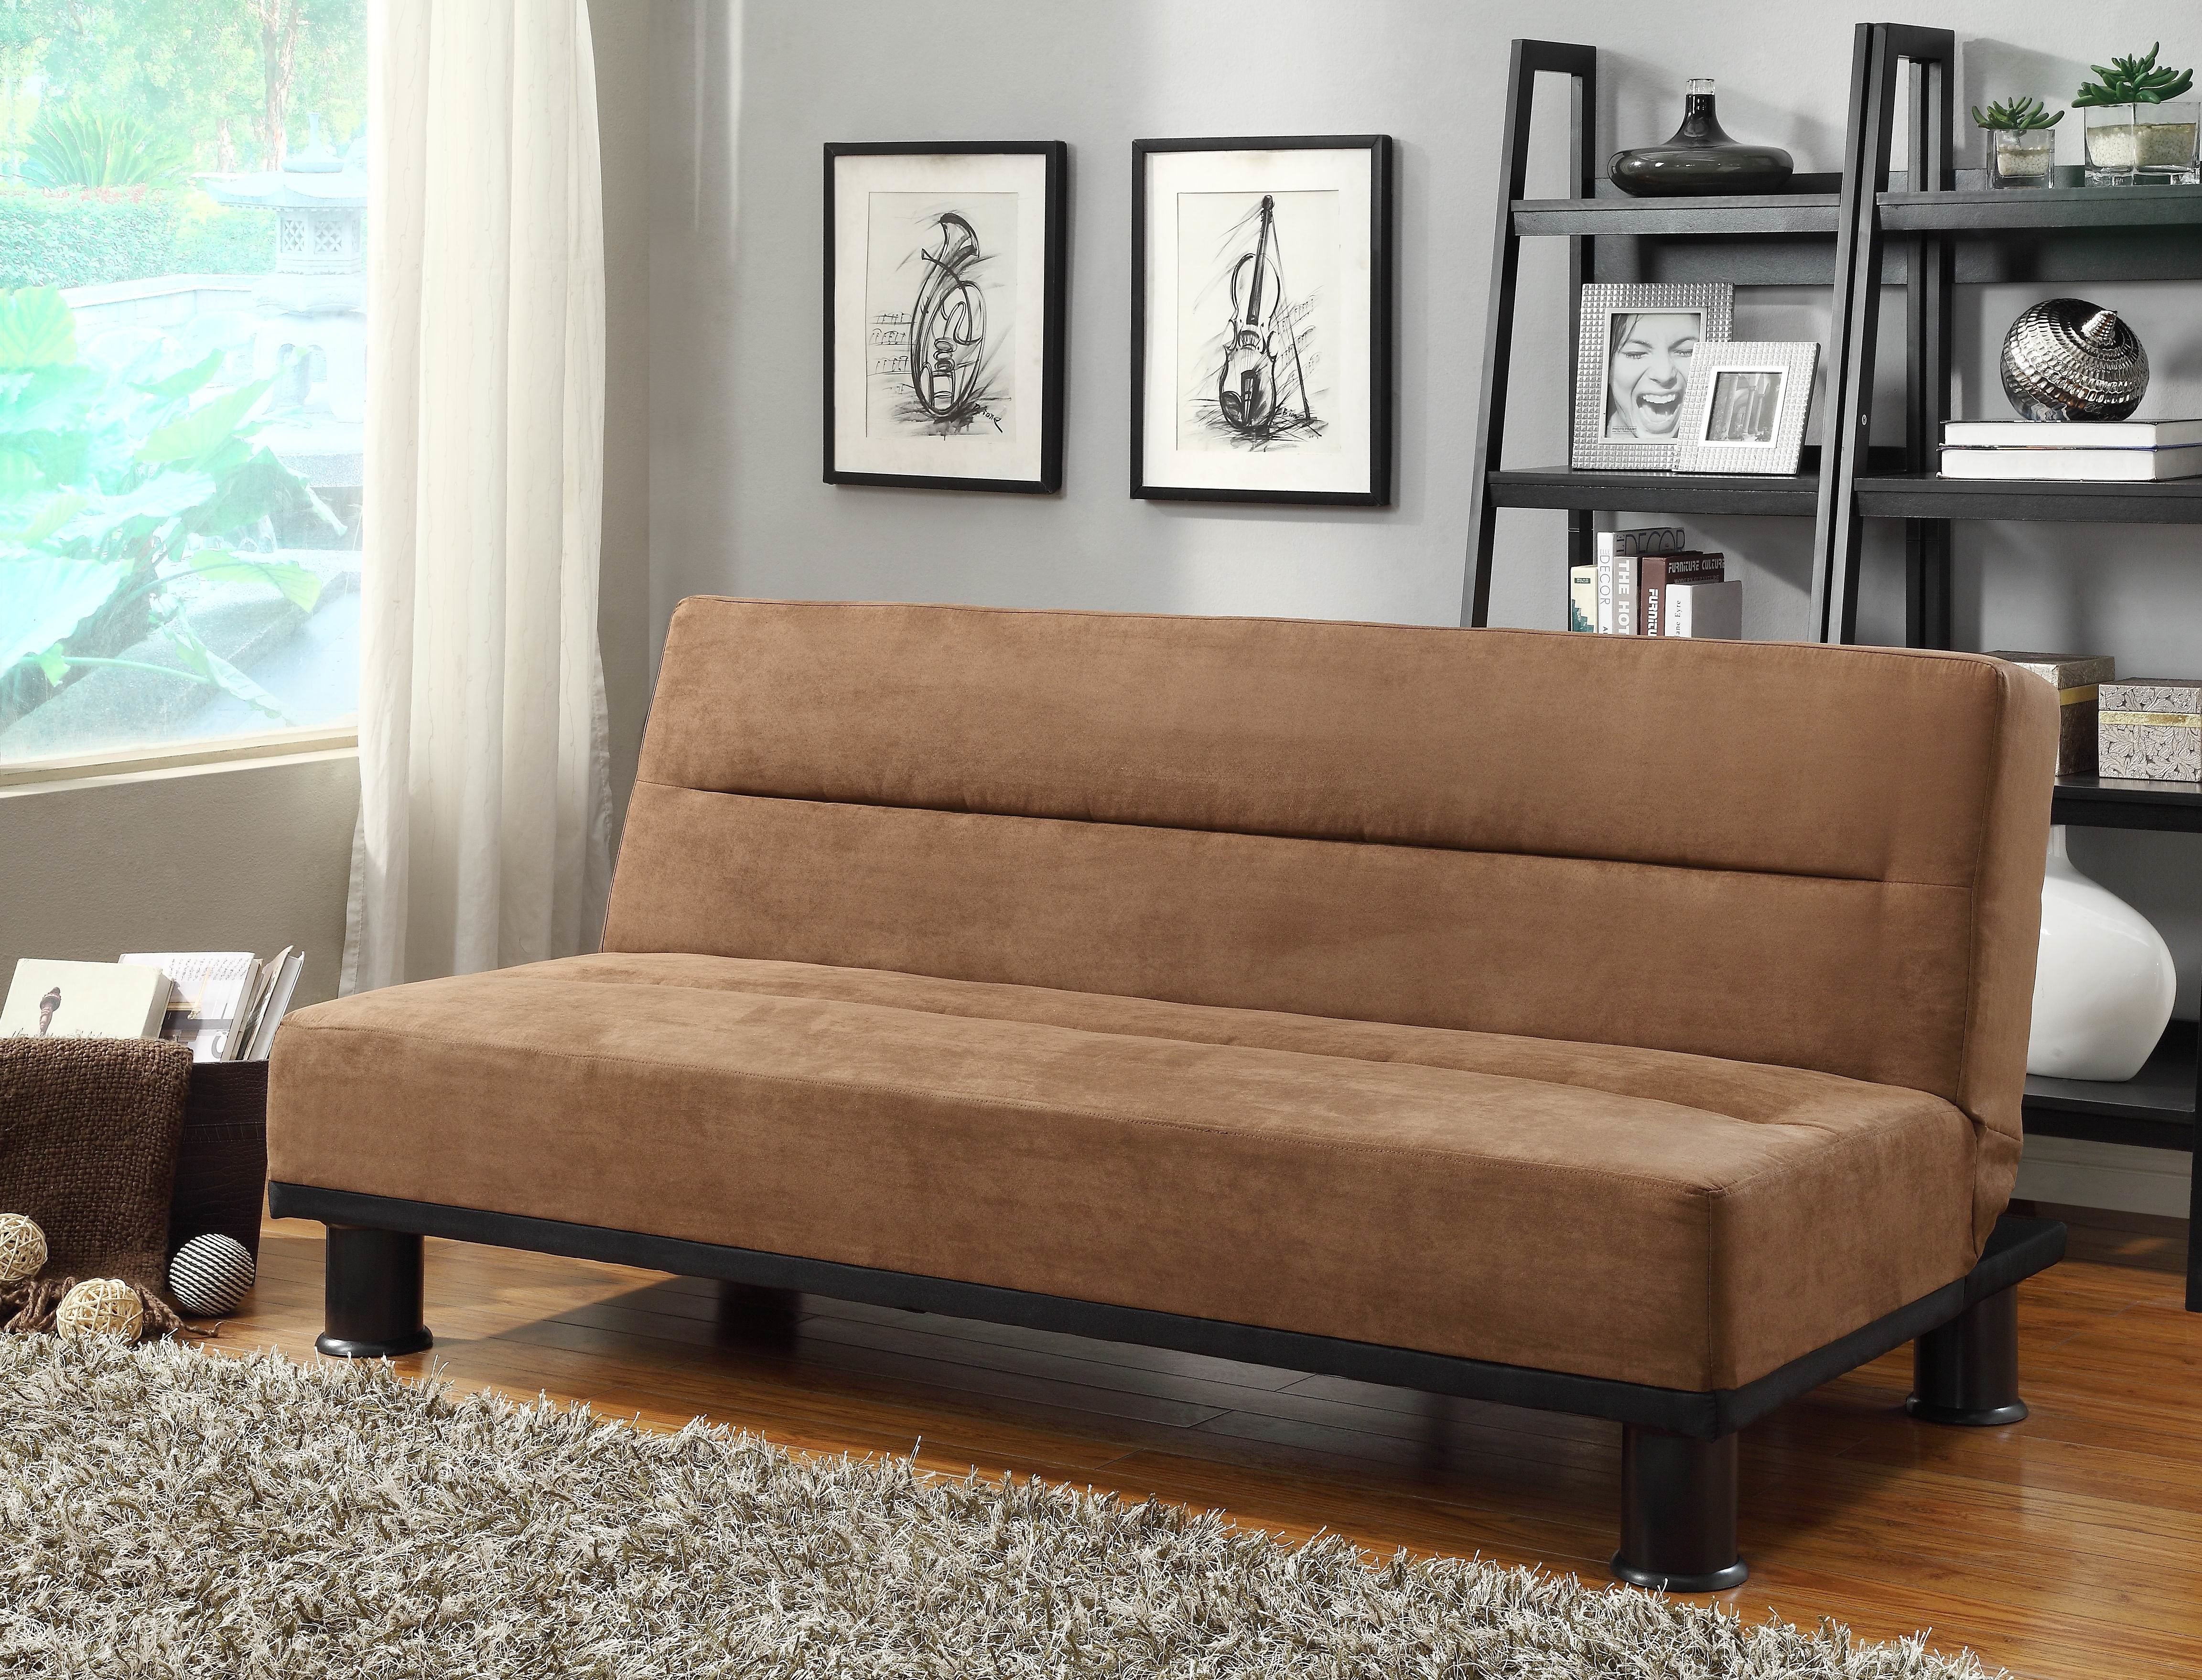 Woodhaven Hill Callie Convertible Sofa & Reviews | Wayfair Pertaining To Callie Sofa Chairs (View 15 of 25)